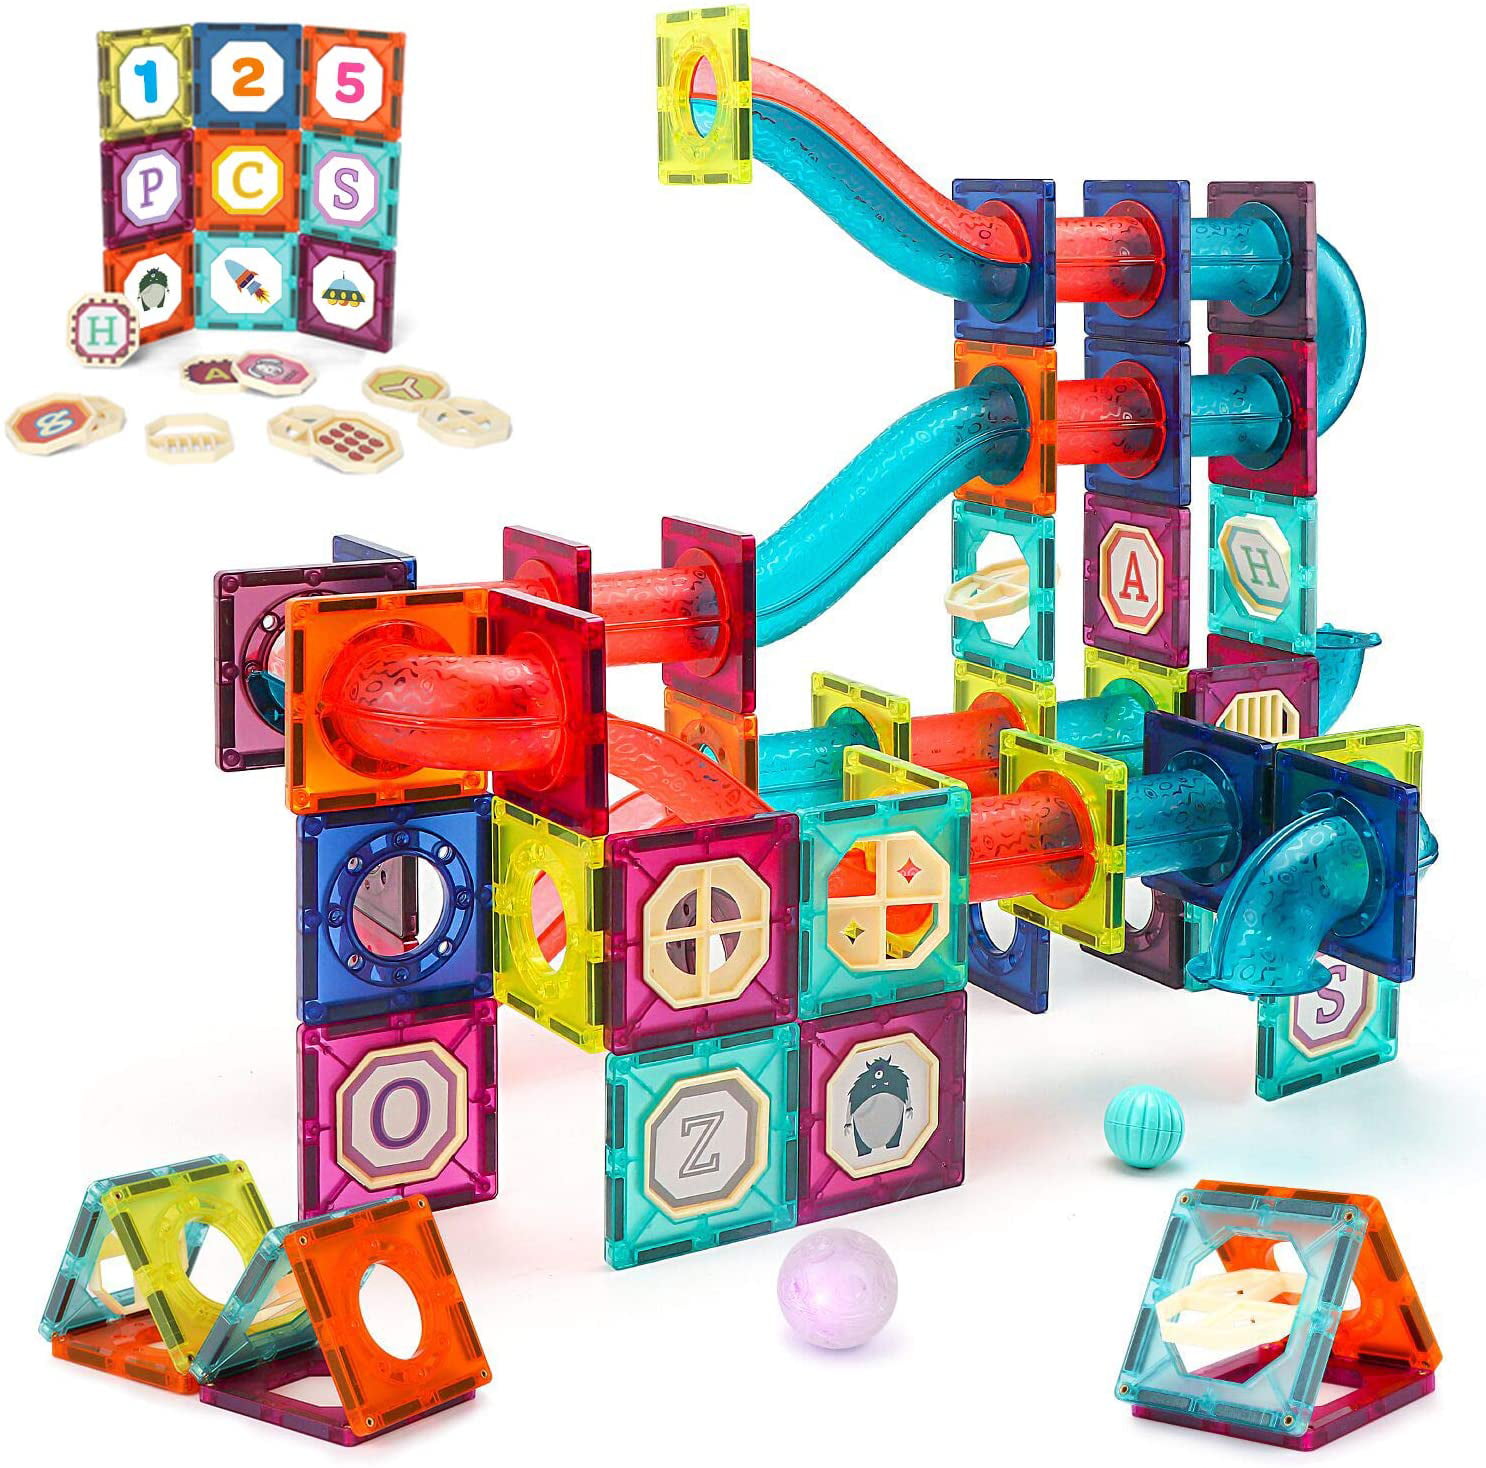 STEM Educational Logic Creativity & Imagination Toy Kit Upgraded Version DISCOVERY KIDS Magnetic Tile Set Building Blocks Construction Kits 25 Piece in 6 Colors For Preschool Storage Bag Included 